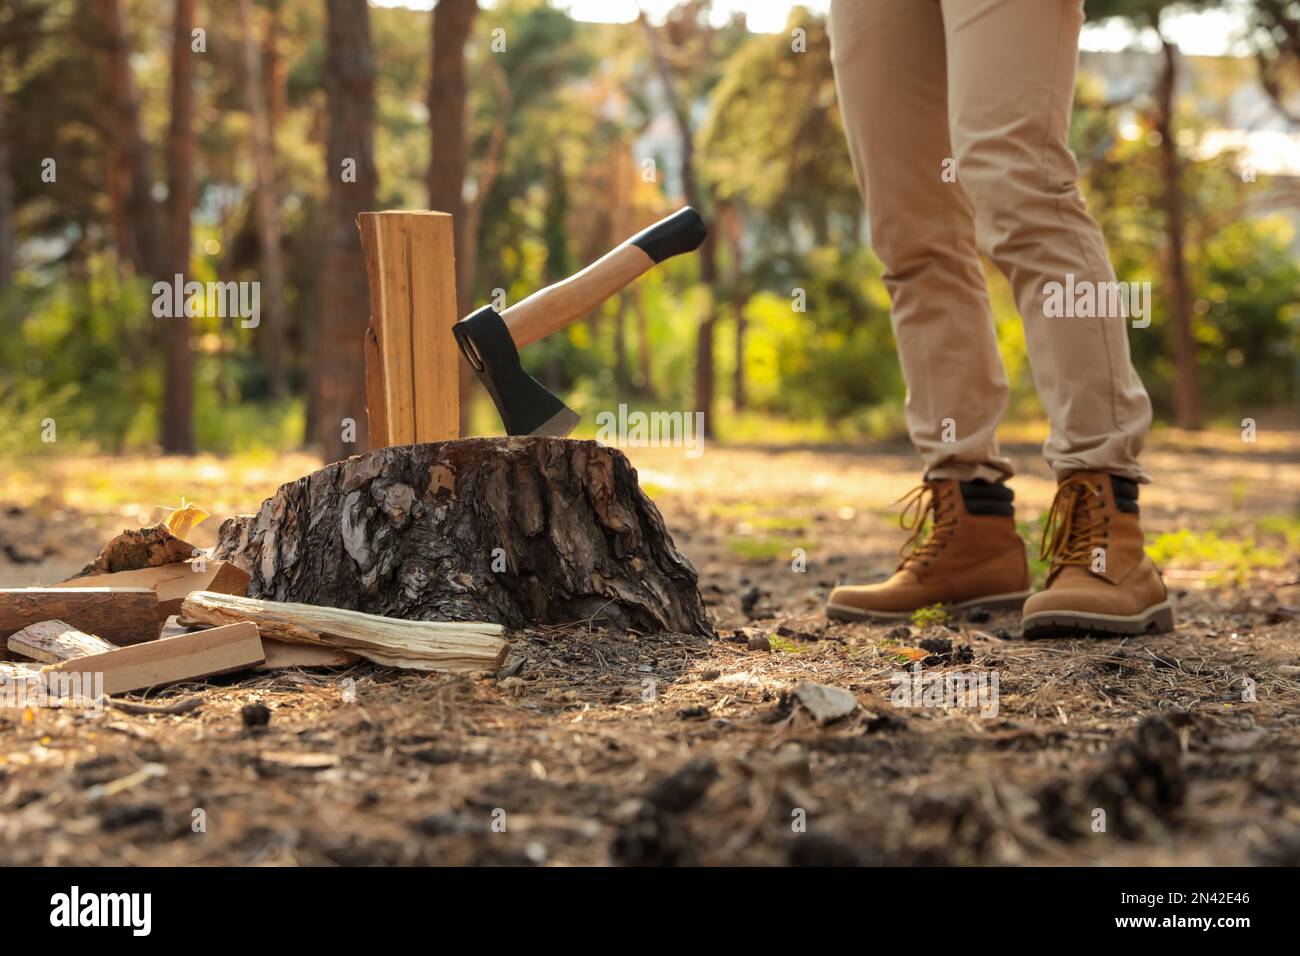 Man tree with axe photography and images - Page 3 - Alamy